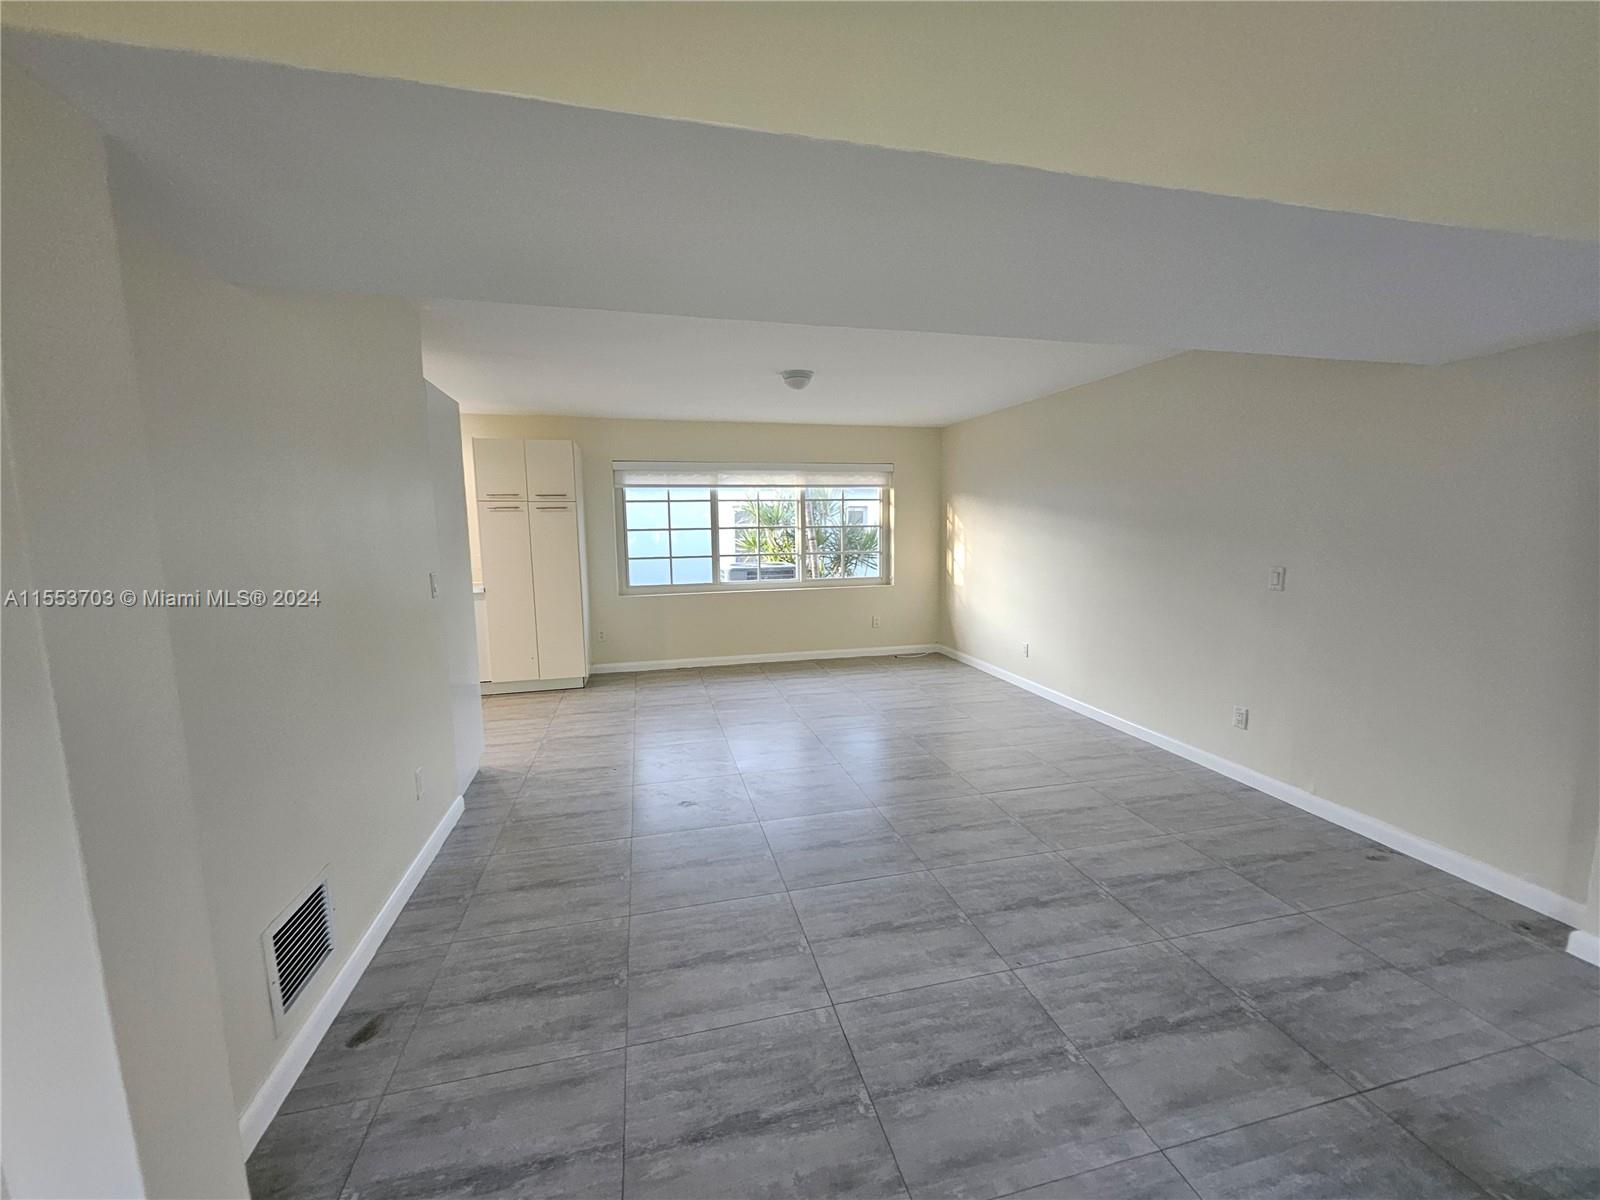 Rental Property at 1201 S Biscayne Point Rd, Miami Beach, Miami-Dade County, Florida - Bedrooms: 3 
Bathrooms: 3  - $5,900 MO.